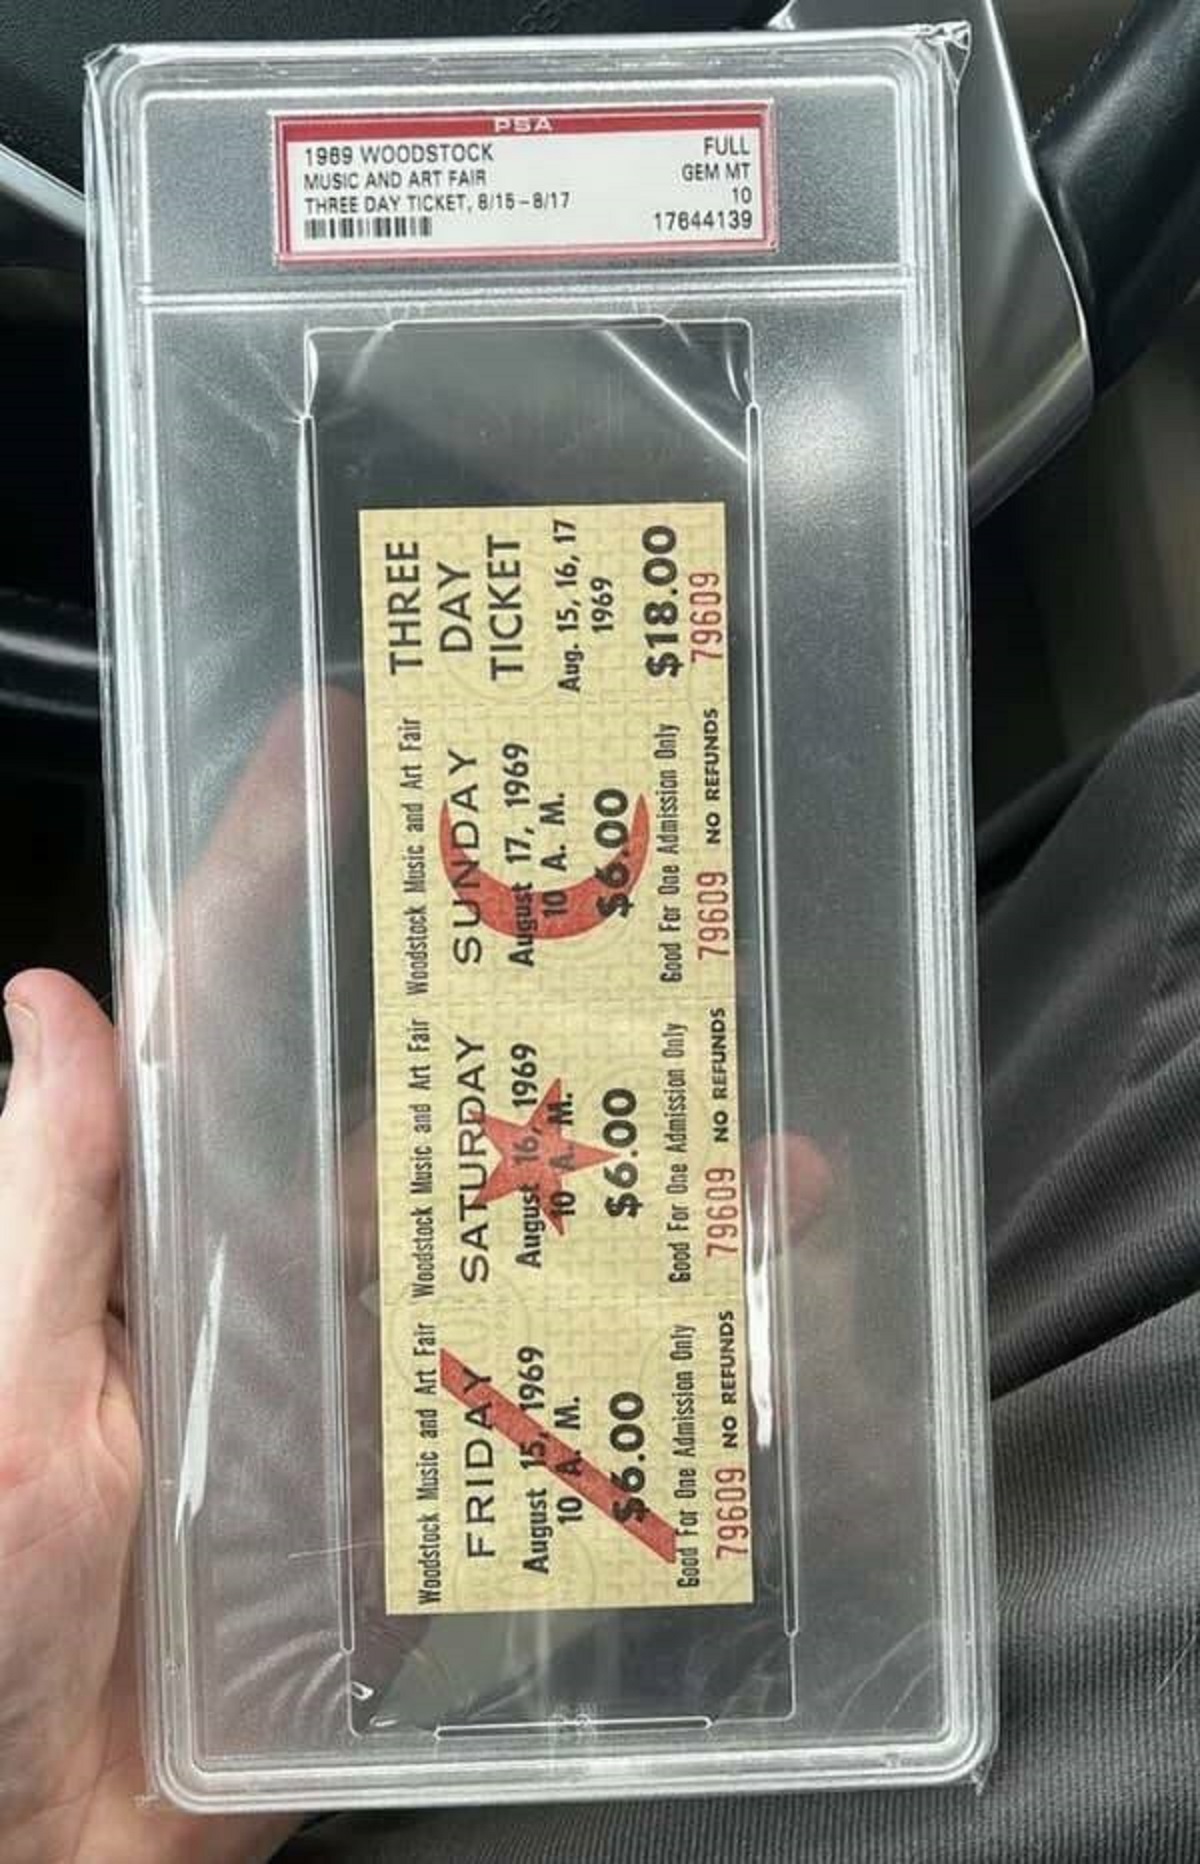 Here's what a Woodstock ticket looked like.